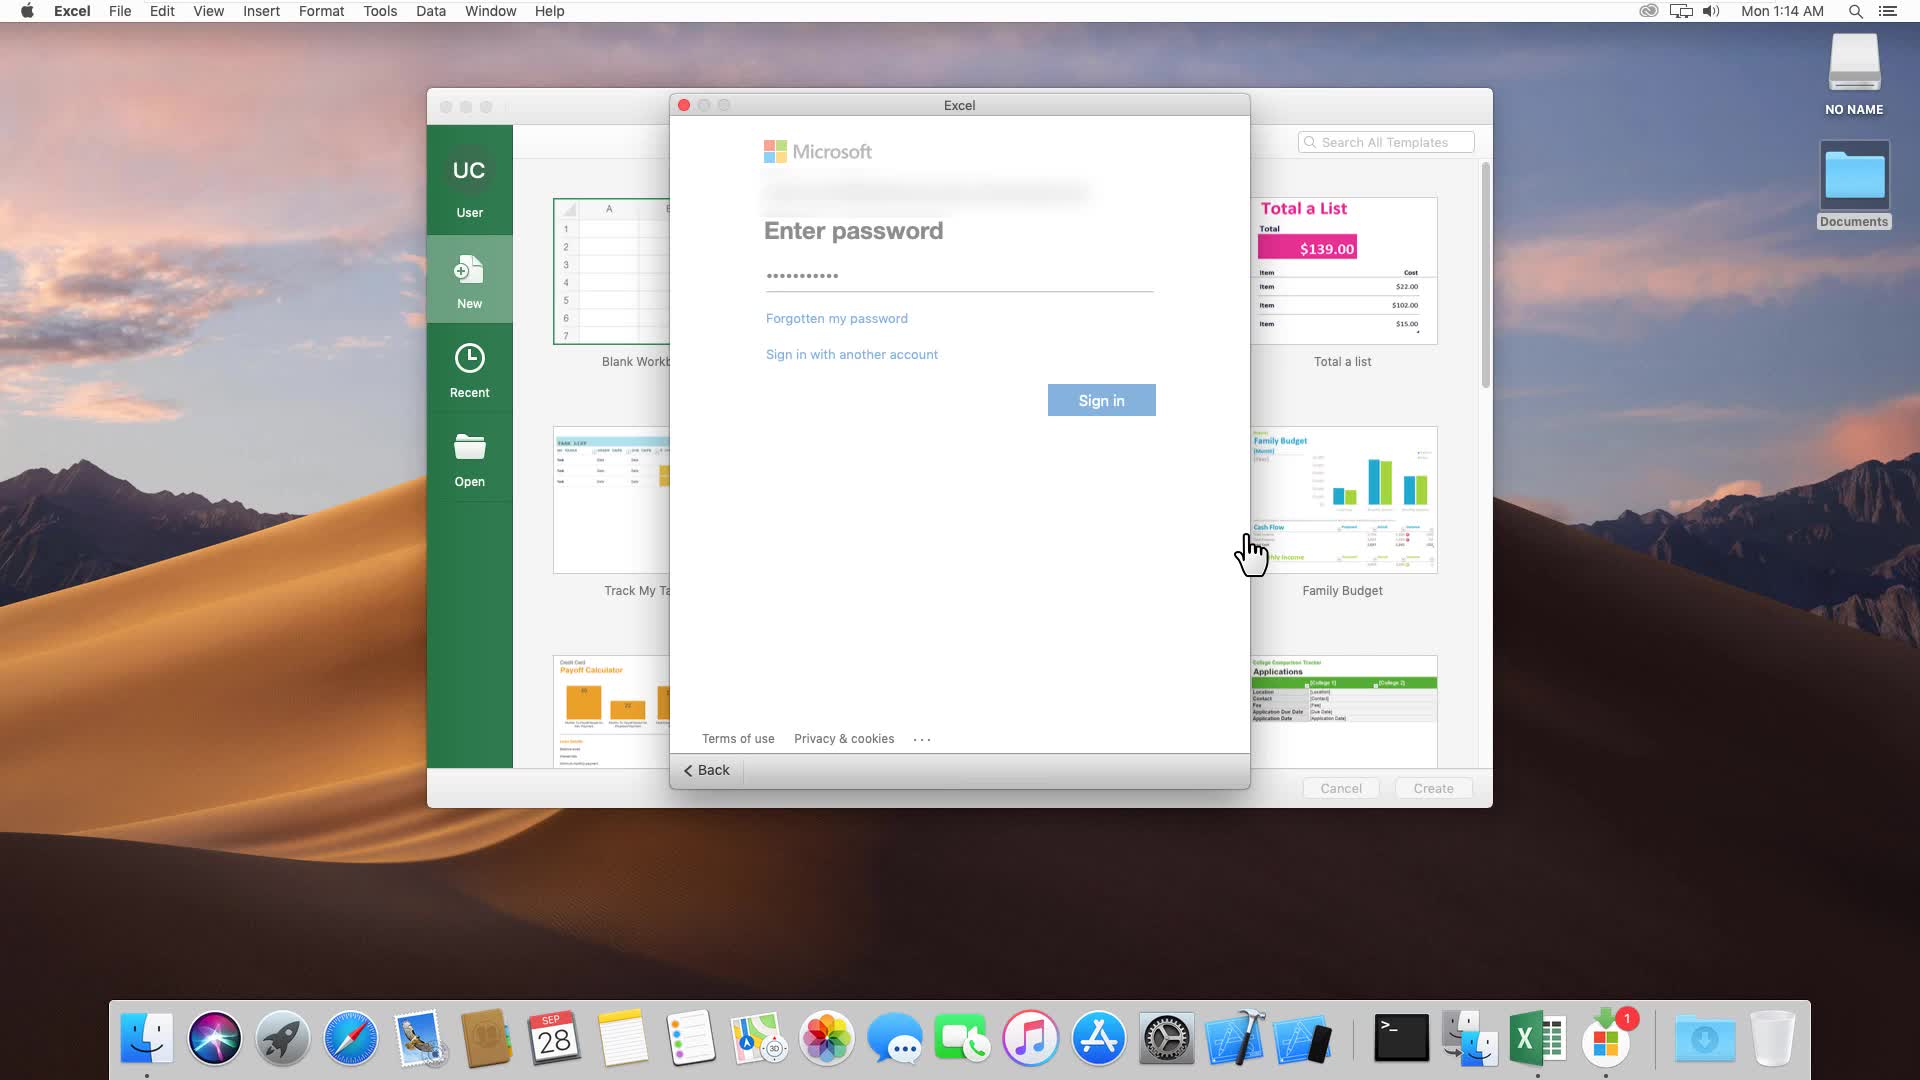 license for microsoft office for mac 2016